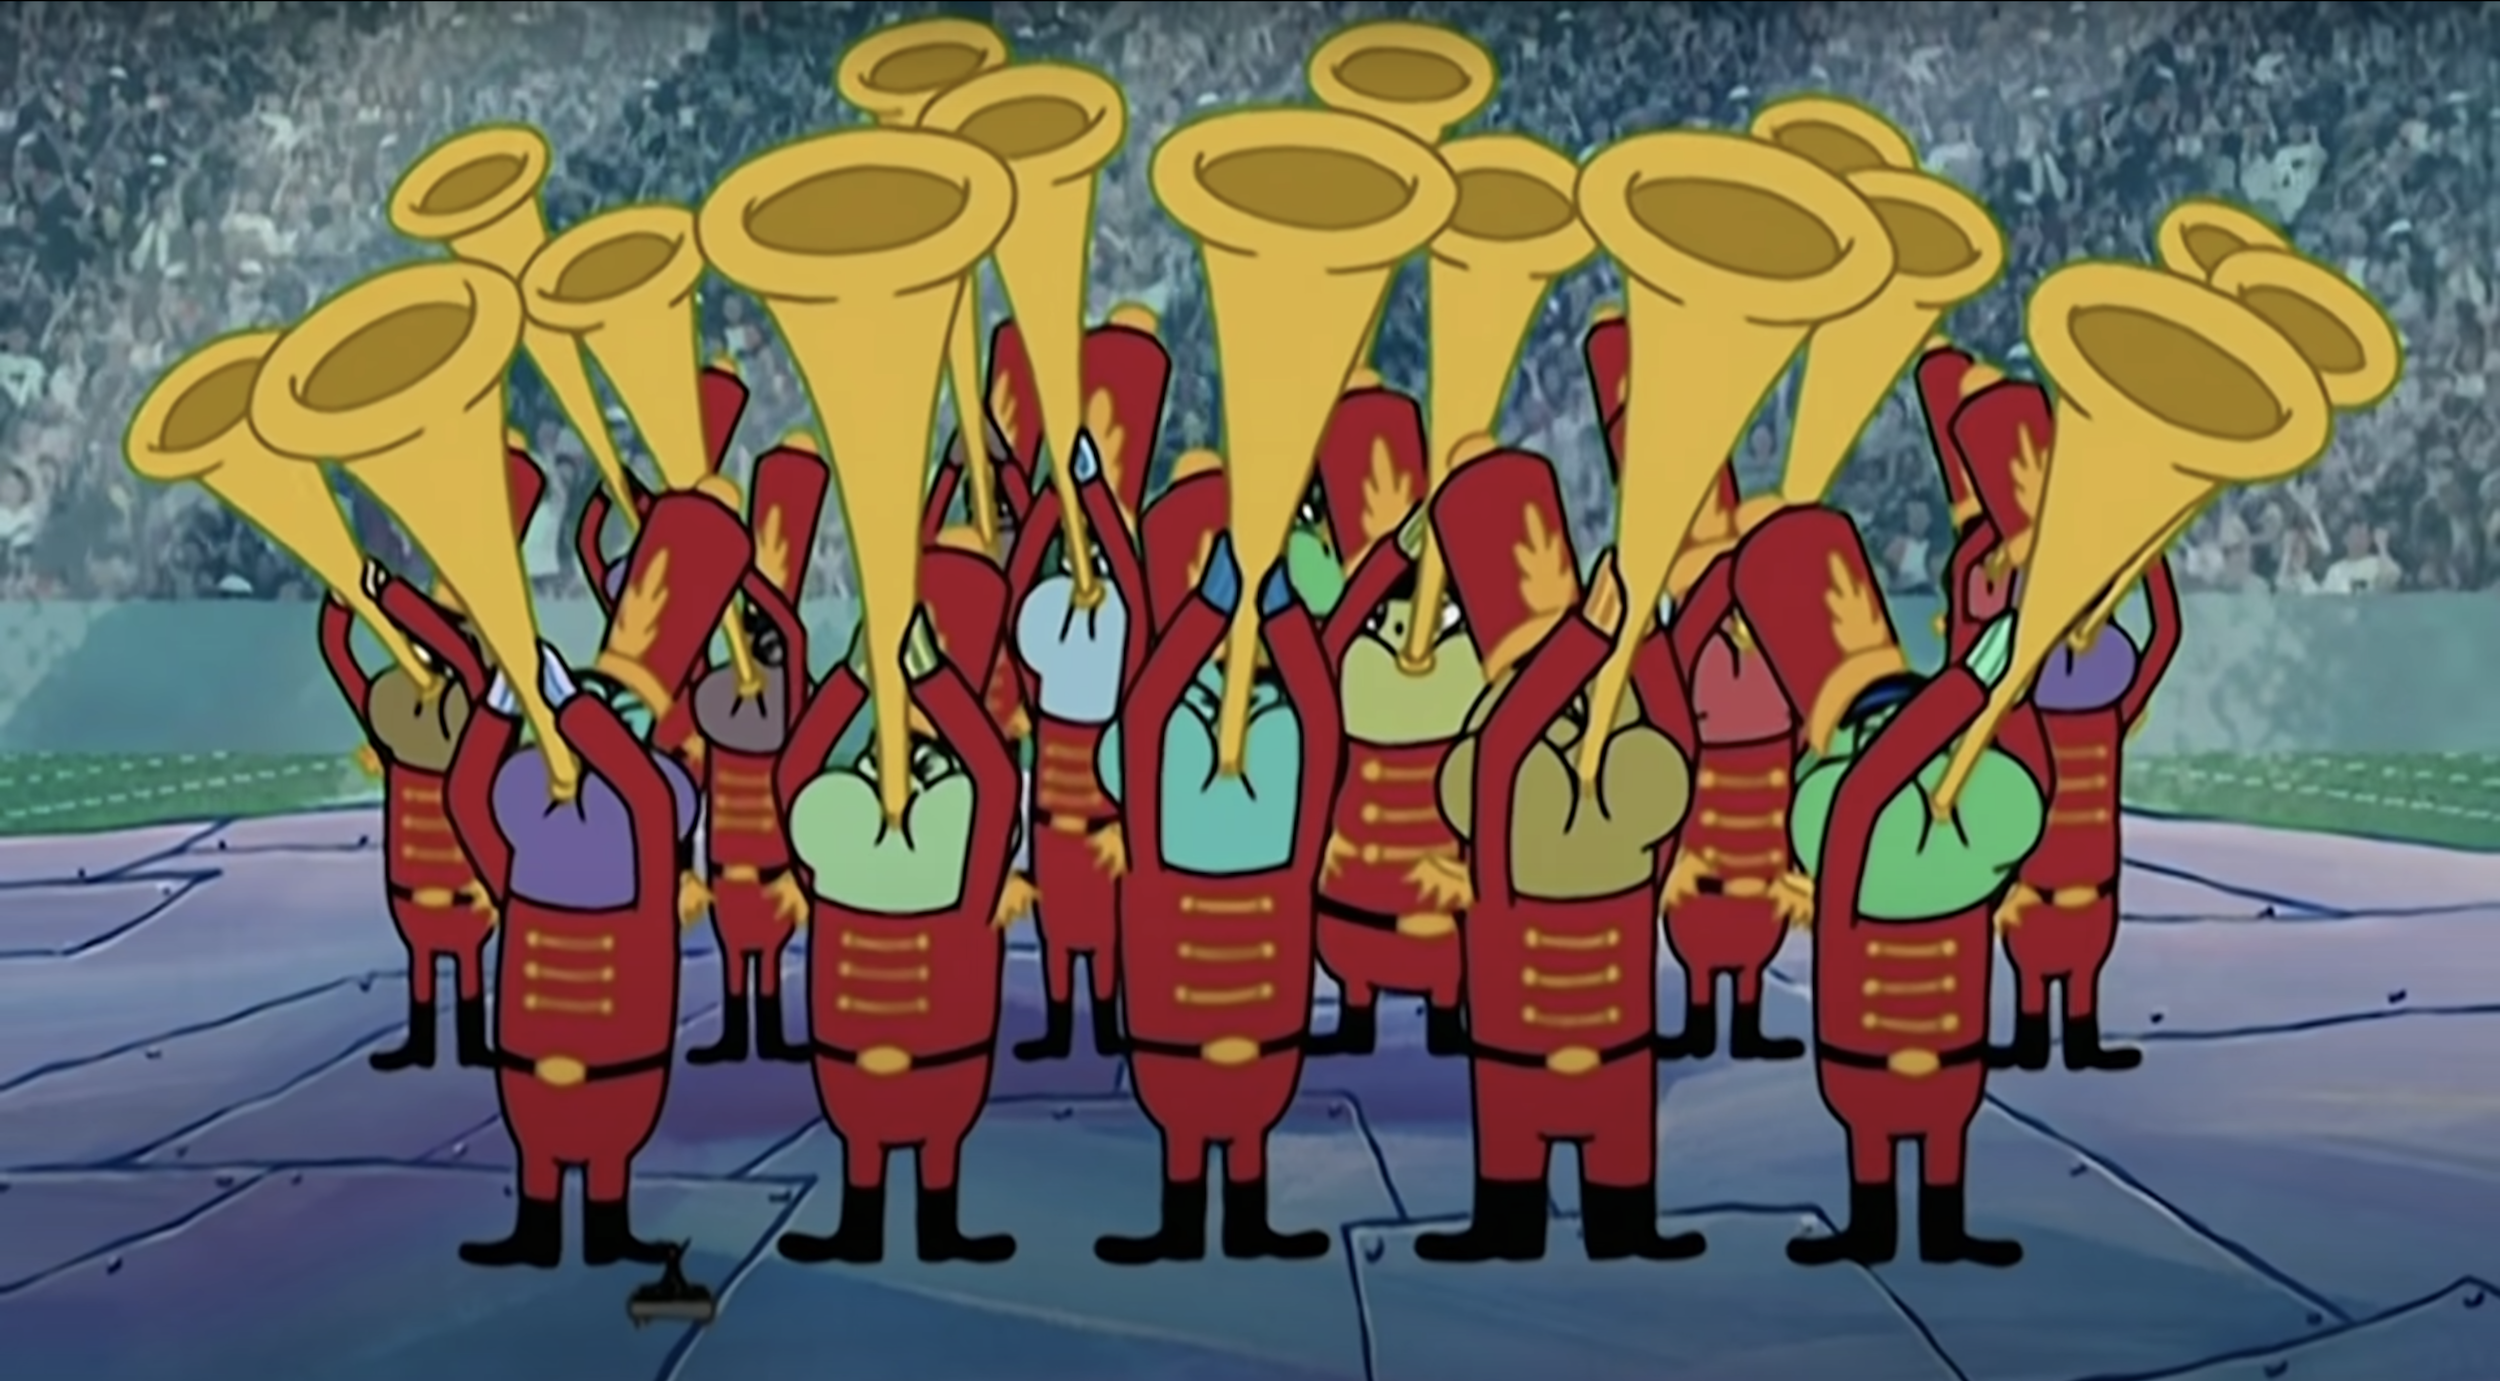 Fish in a marching band play the trumpet in perfect fanfare in &quot;Spongebob Squarepants&quot;